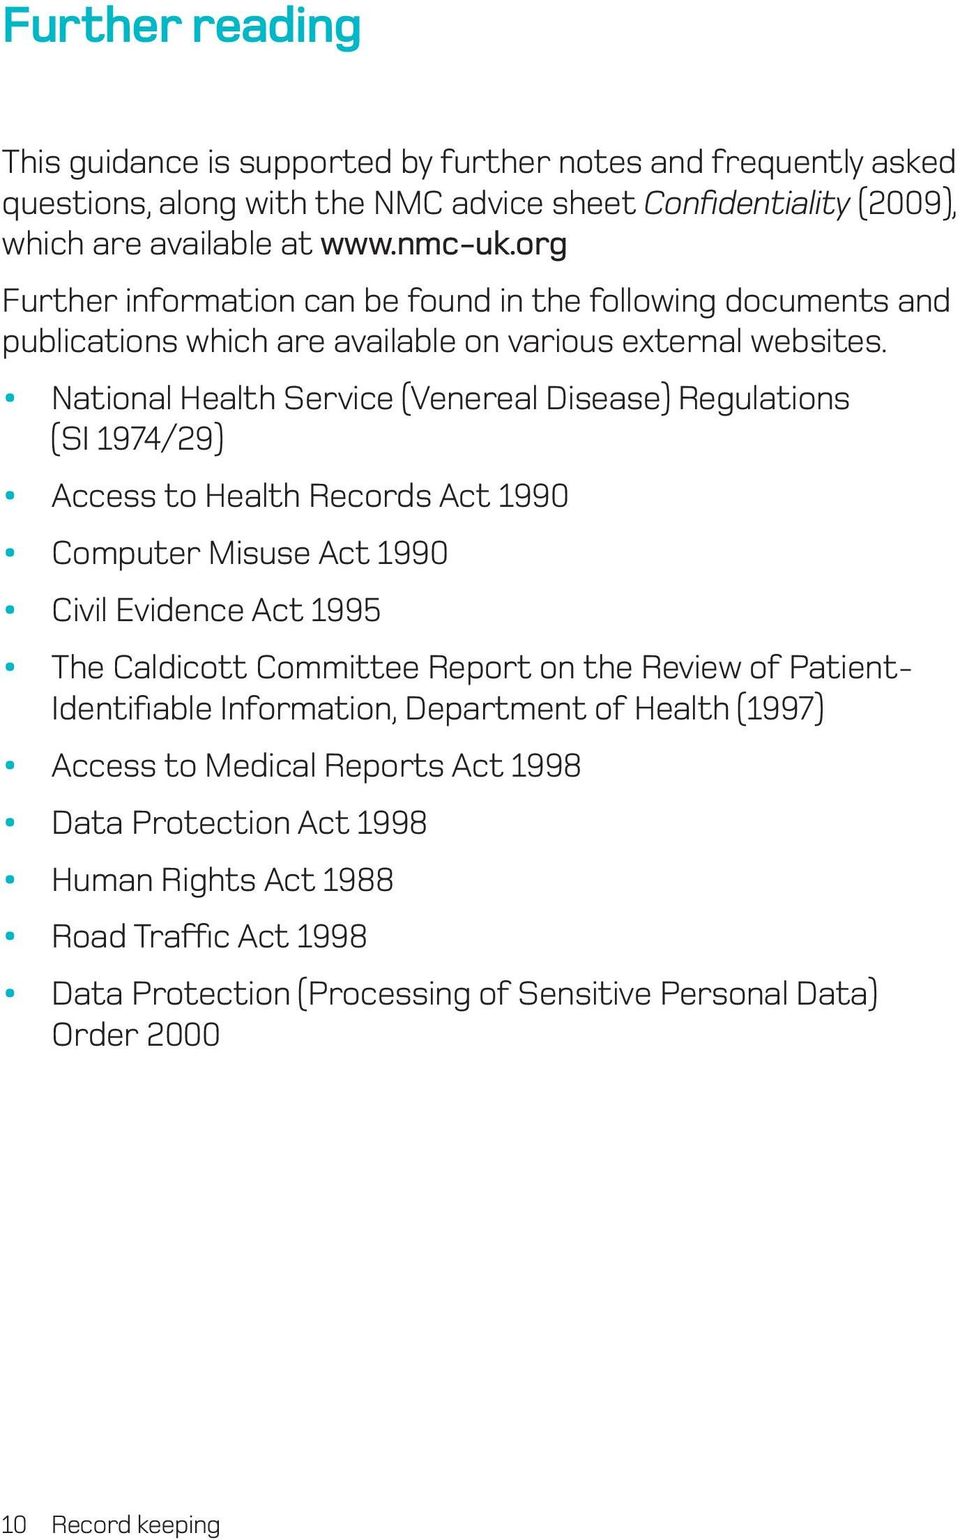 National Health Service (Venereal Disease) Regulations (SI 1974/29) Access to Health Records Act 1990 Computer Misuse Act 1990 Civil Evidence Act 1995 The Caldicott Committee Report on the